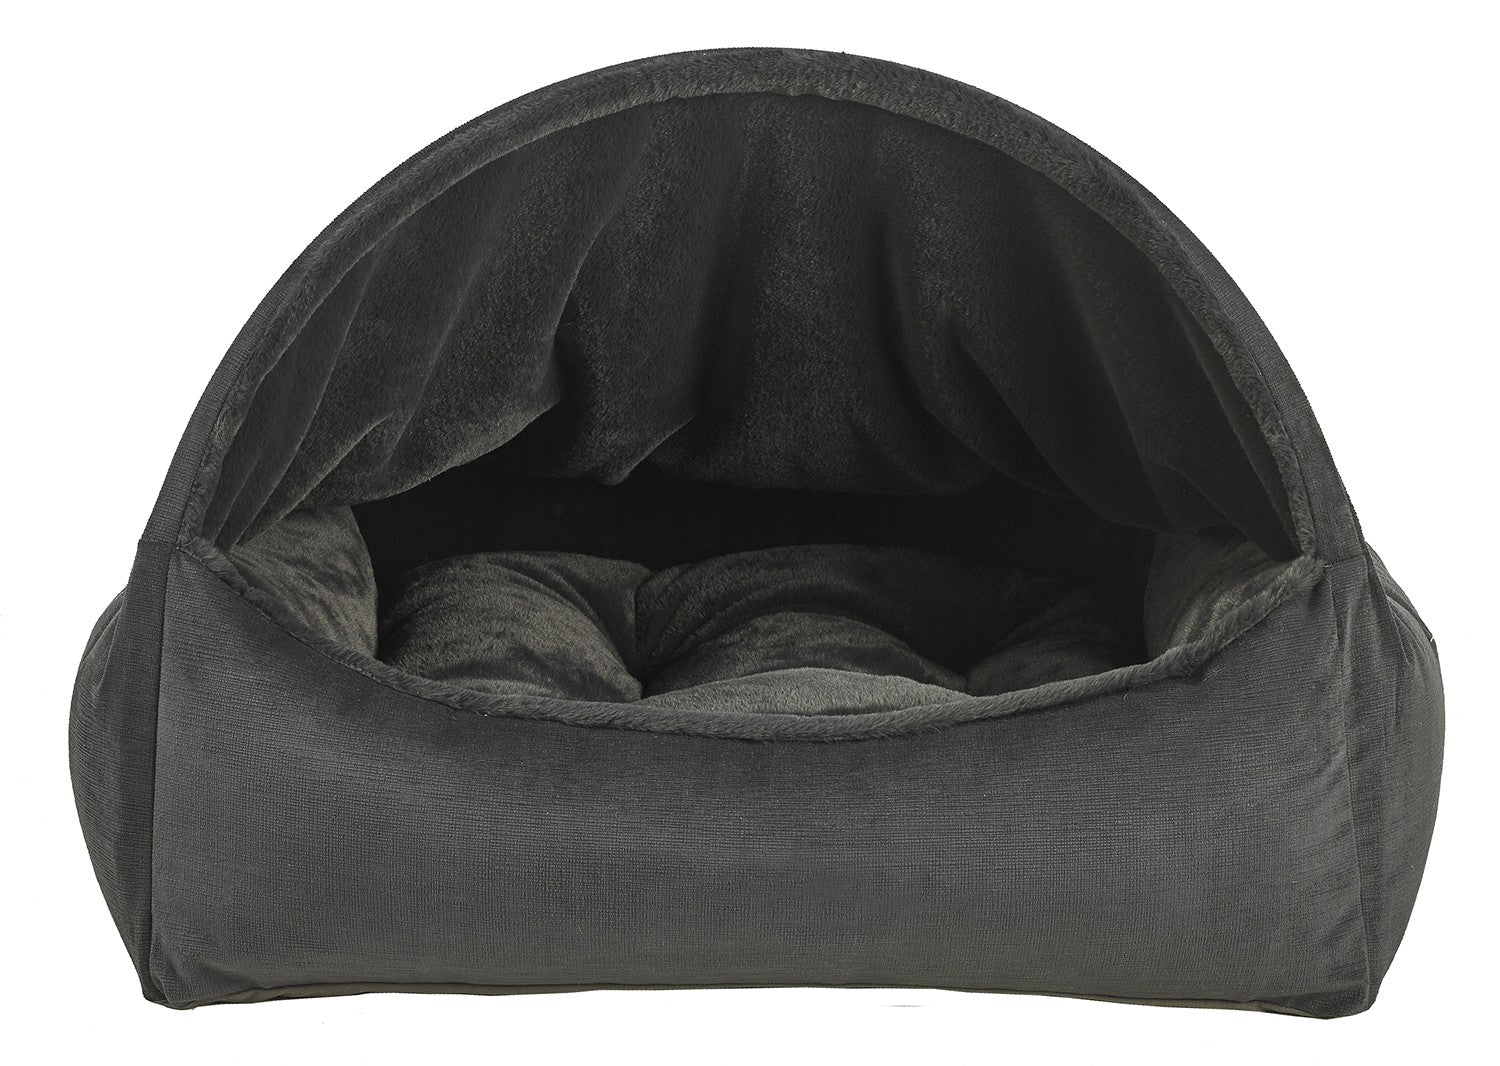 Bowsers Dog Bed - Canopy Small - Galaxy